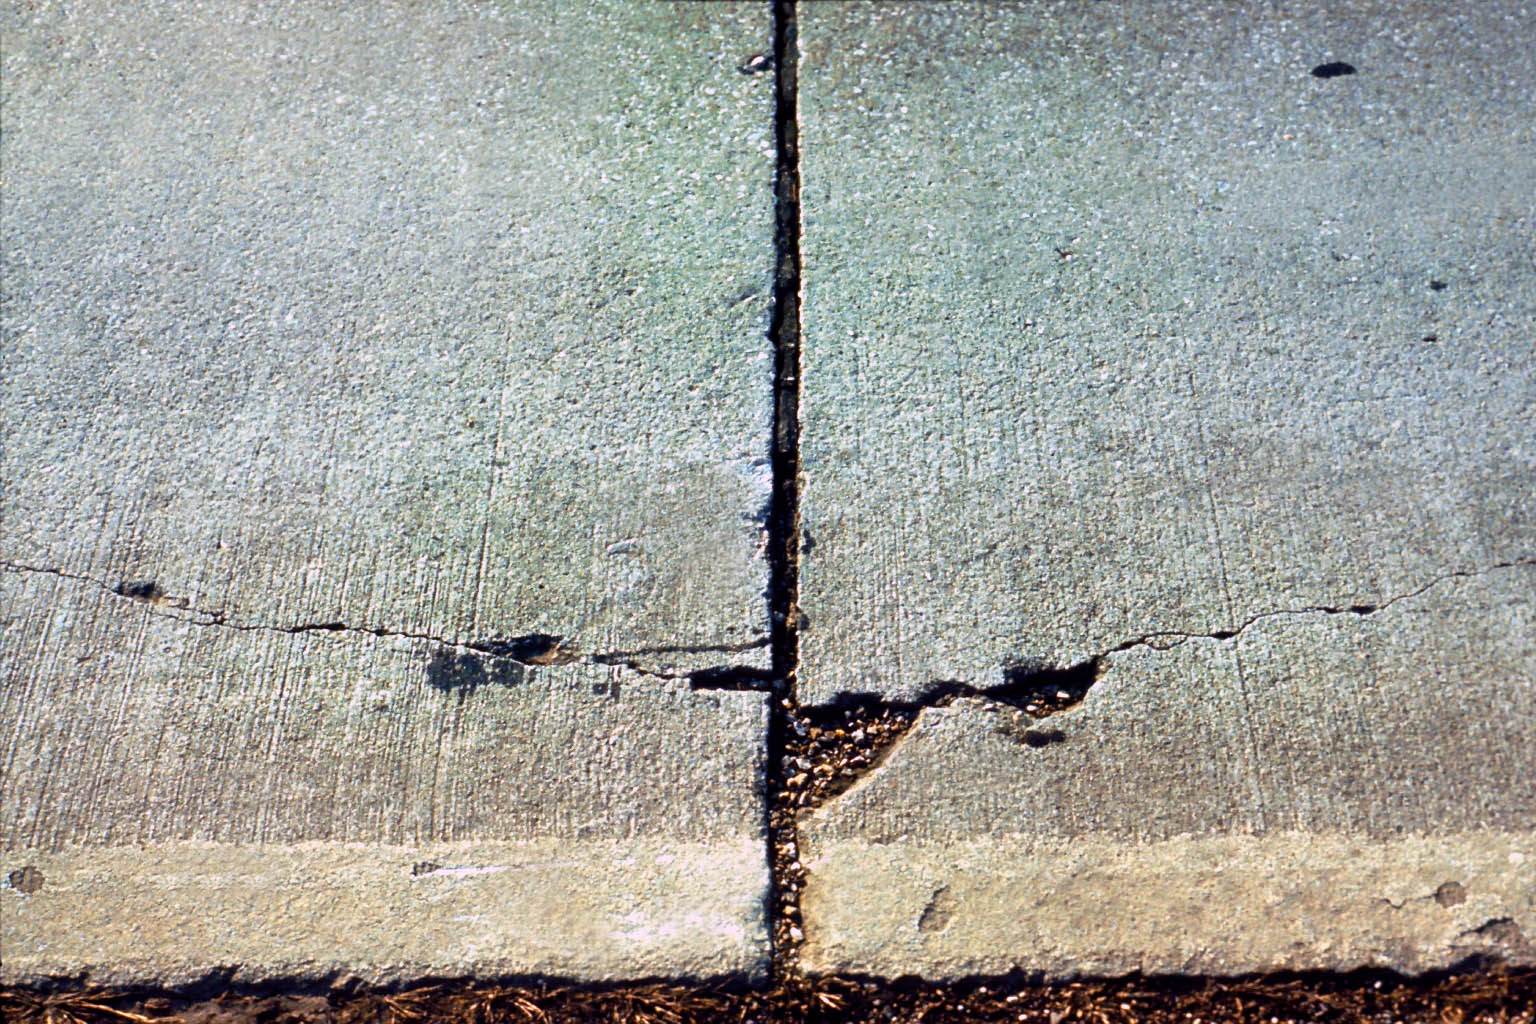 Cracks are showing in the concrete pavement.